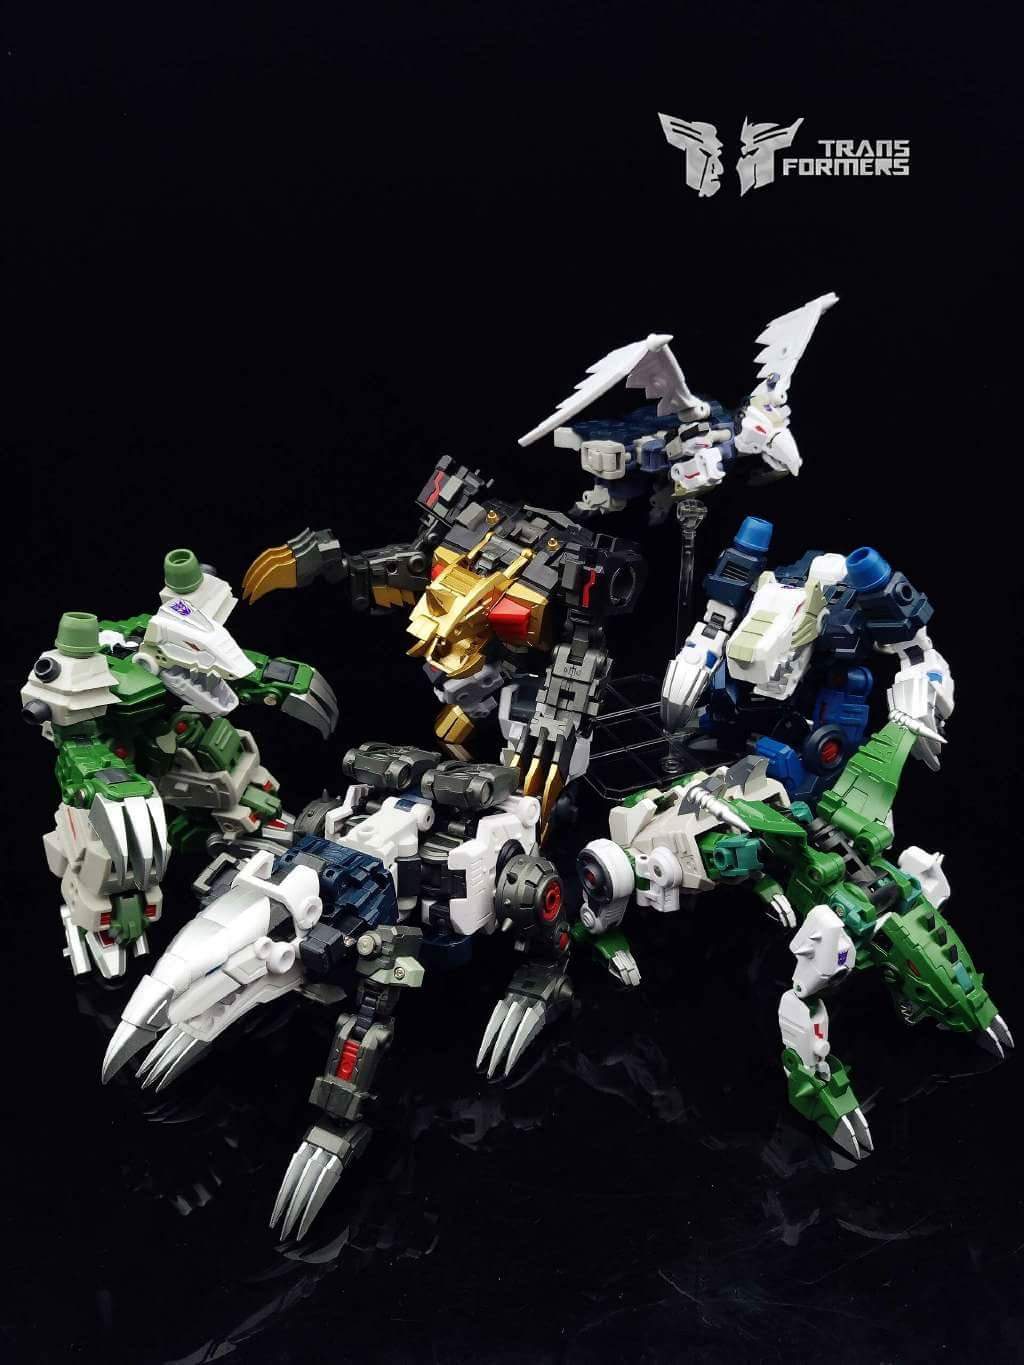 [FansProject] Produit Tiers - Ryu-Oh aka Dinoking (Victory) | Beastructor aka Monstructor (USA) - Page 2 6M0UM4s3